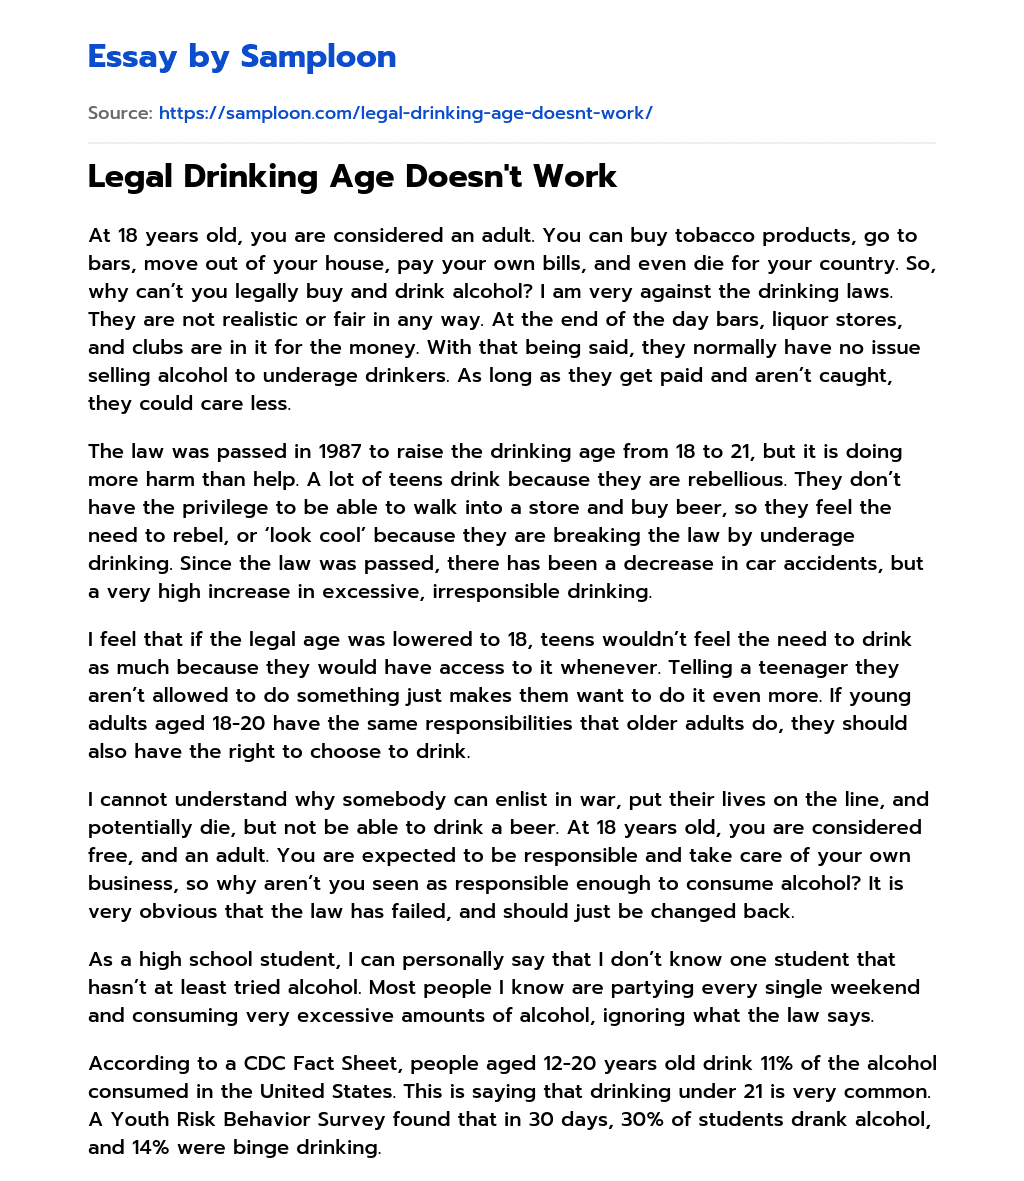 Legal Drinking Age Doesn’t Work essay